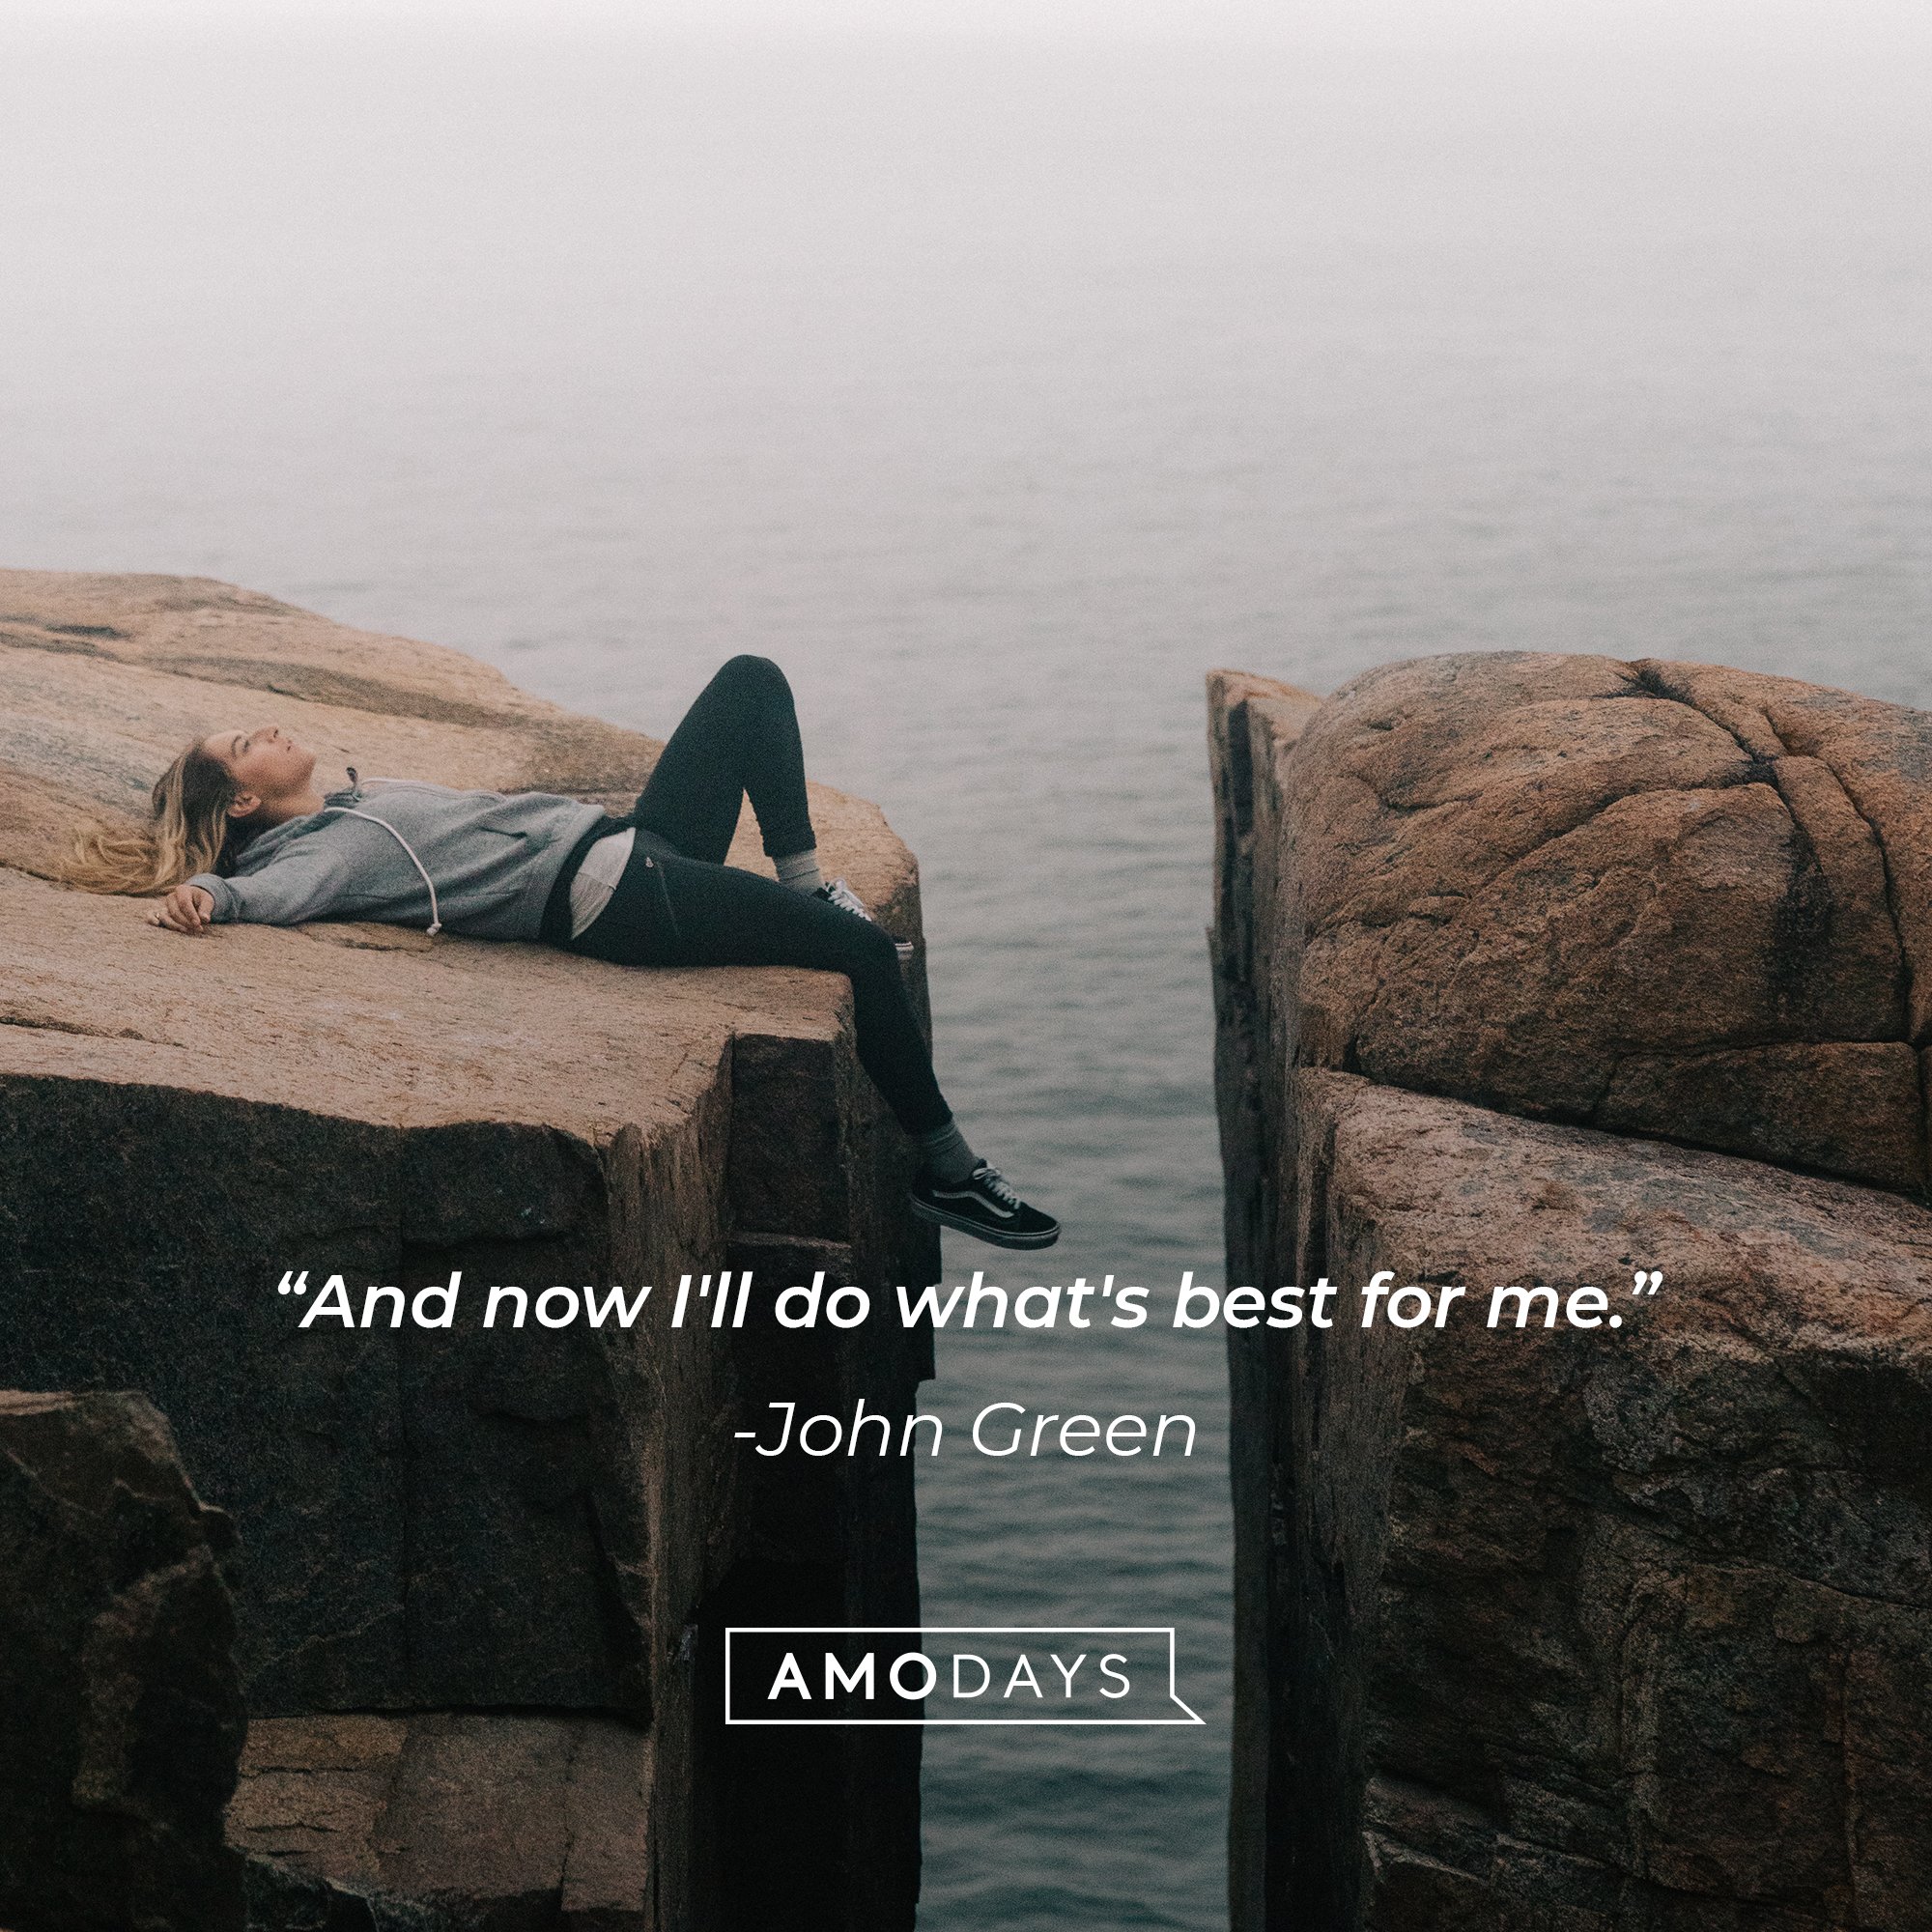  John Green’s quote: "And now I'll do what's best for me." | Image: AmoDays